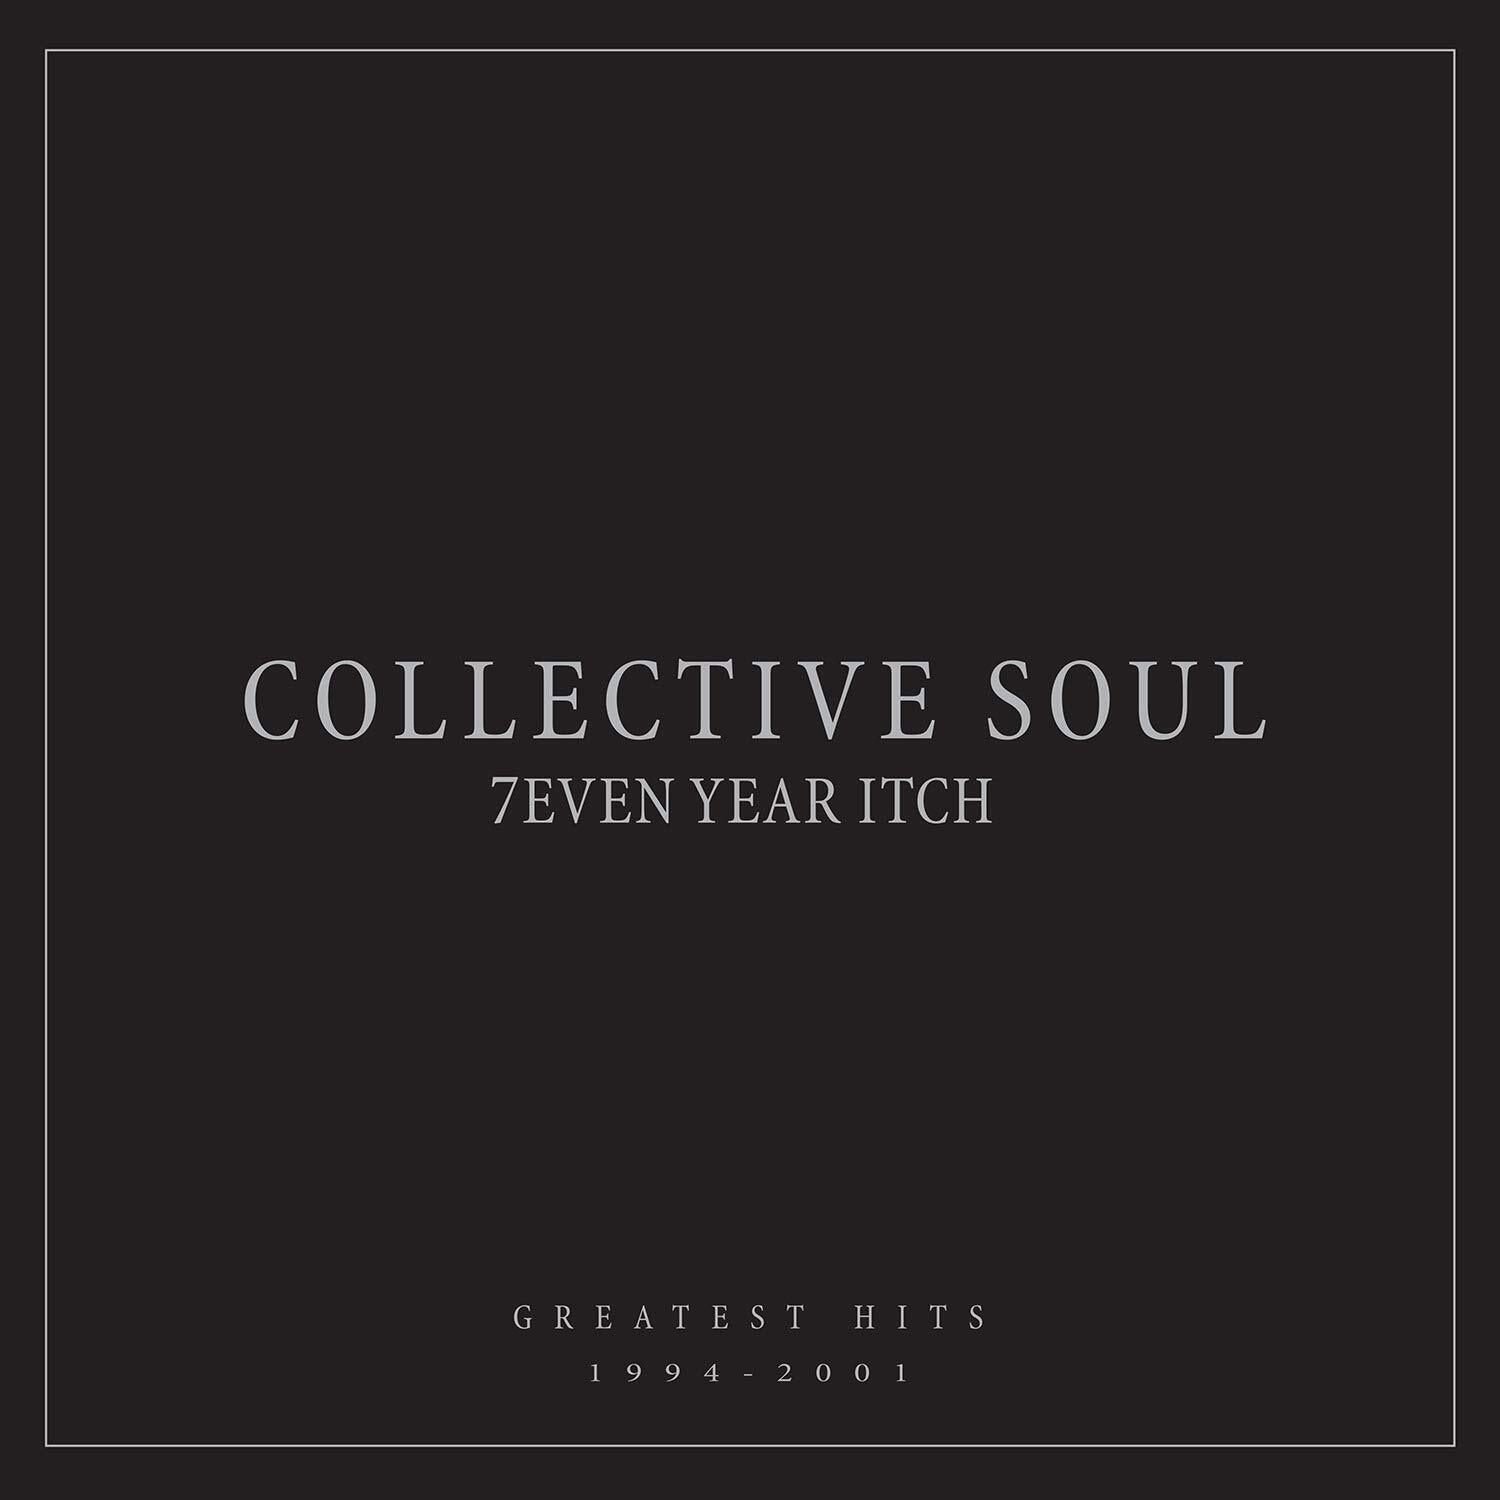 Collective Soul 7even Year Itch: Greatest Hits, 1994-2001 (CD)